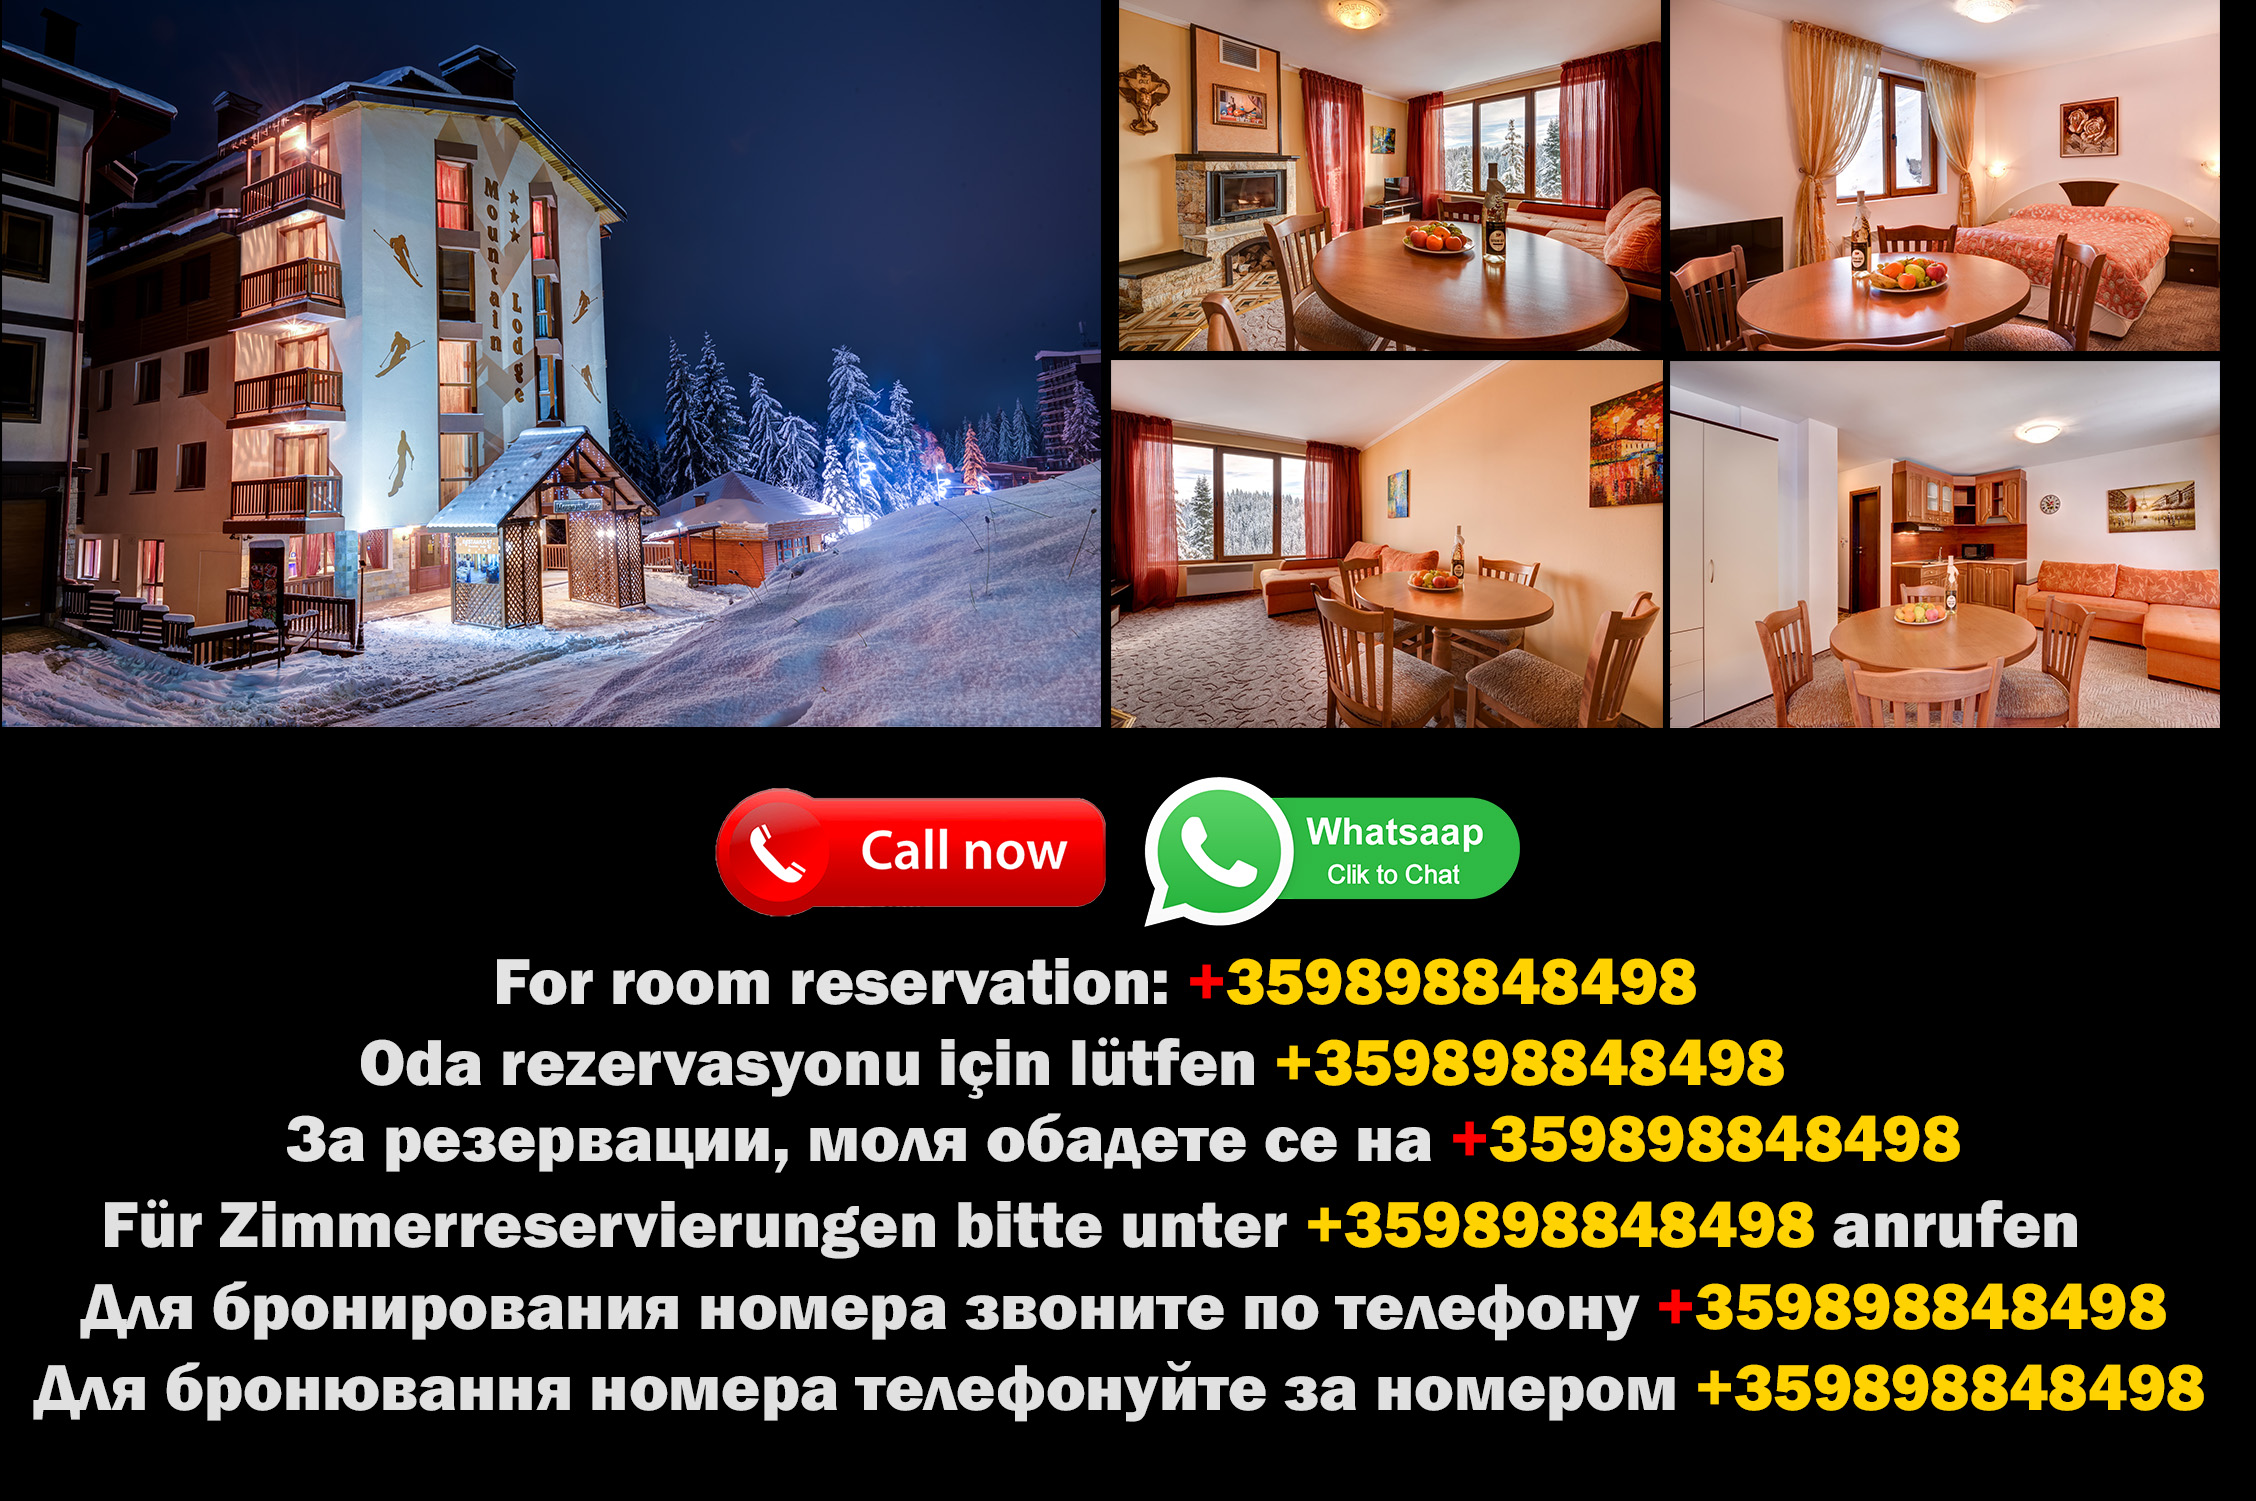 Hotels in Pamporovo - The Mountain Lodge